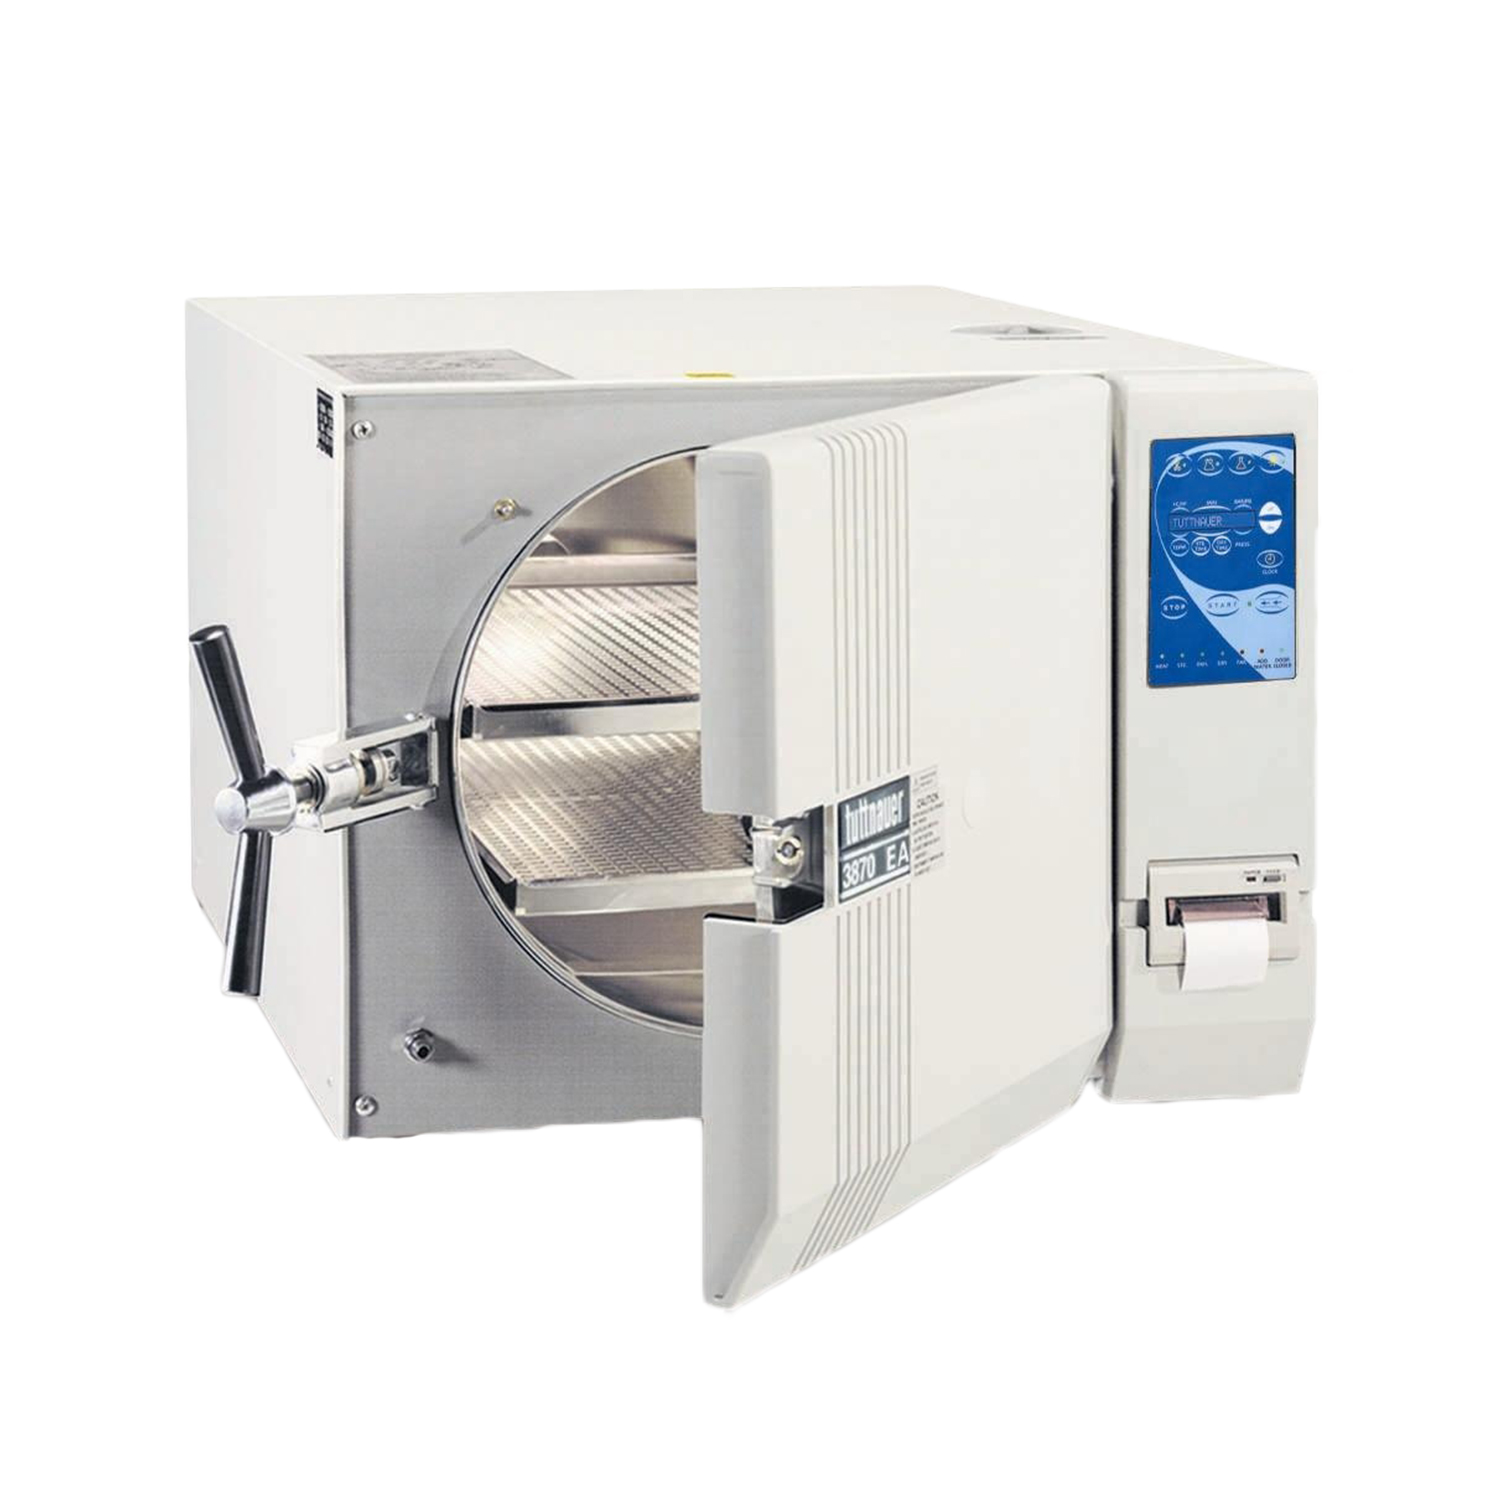 Autoclave - Device used to sterilize medical equipment 